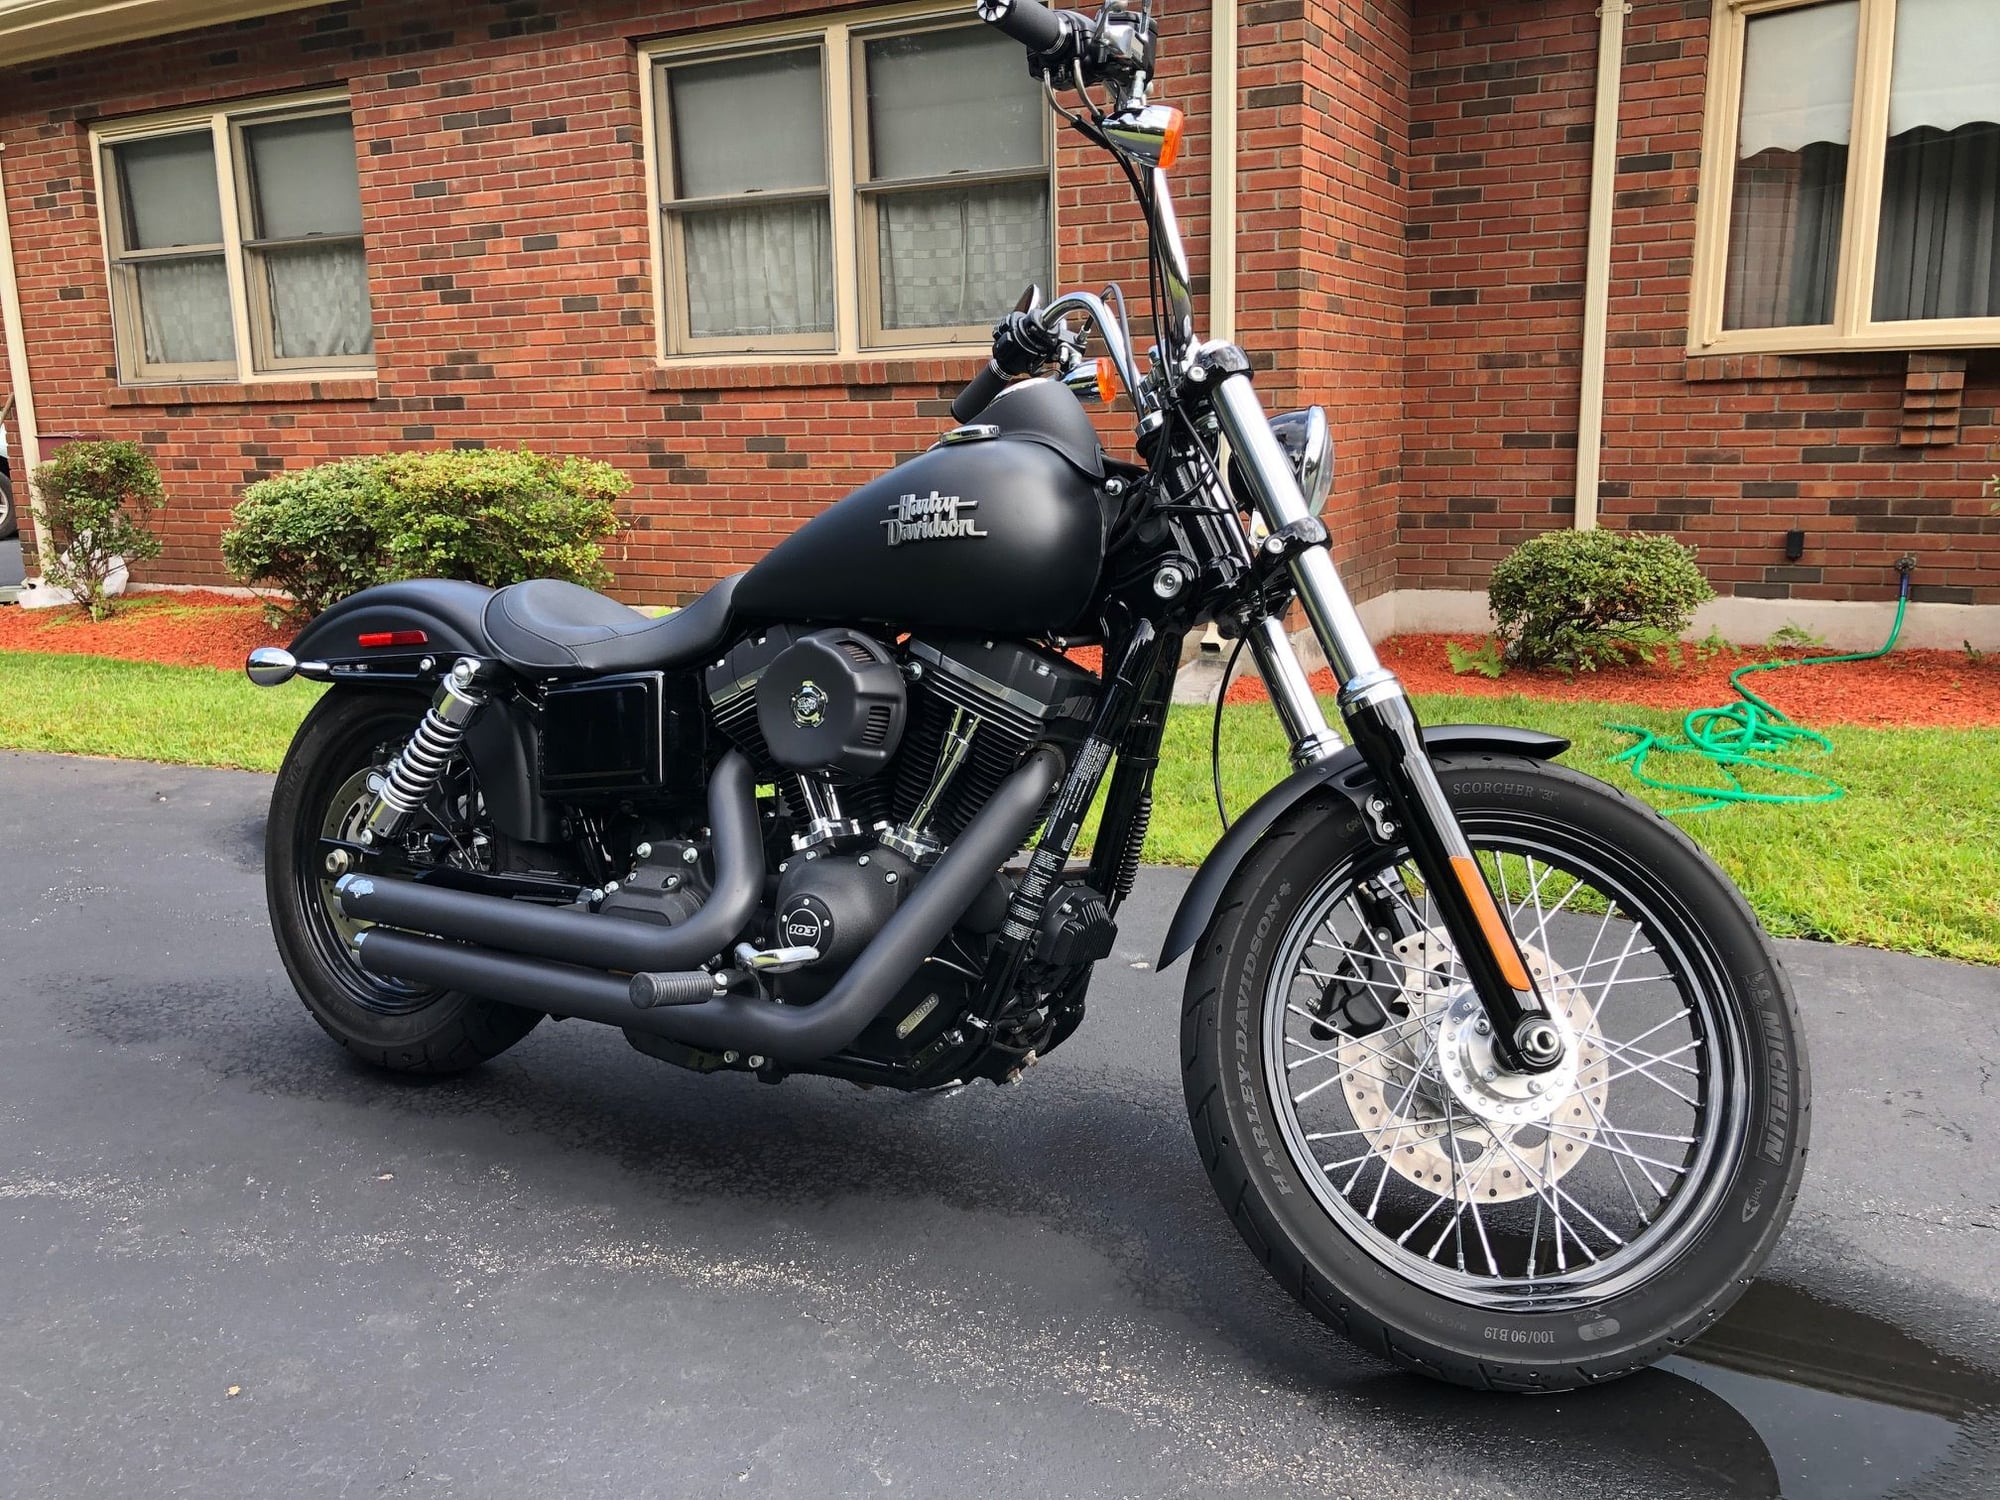 2010 Harley-Davidson Dyna Glide For Sale | Motorcycle Classifieds |  Motorcycle.com